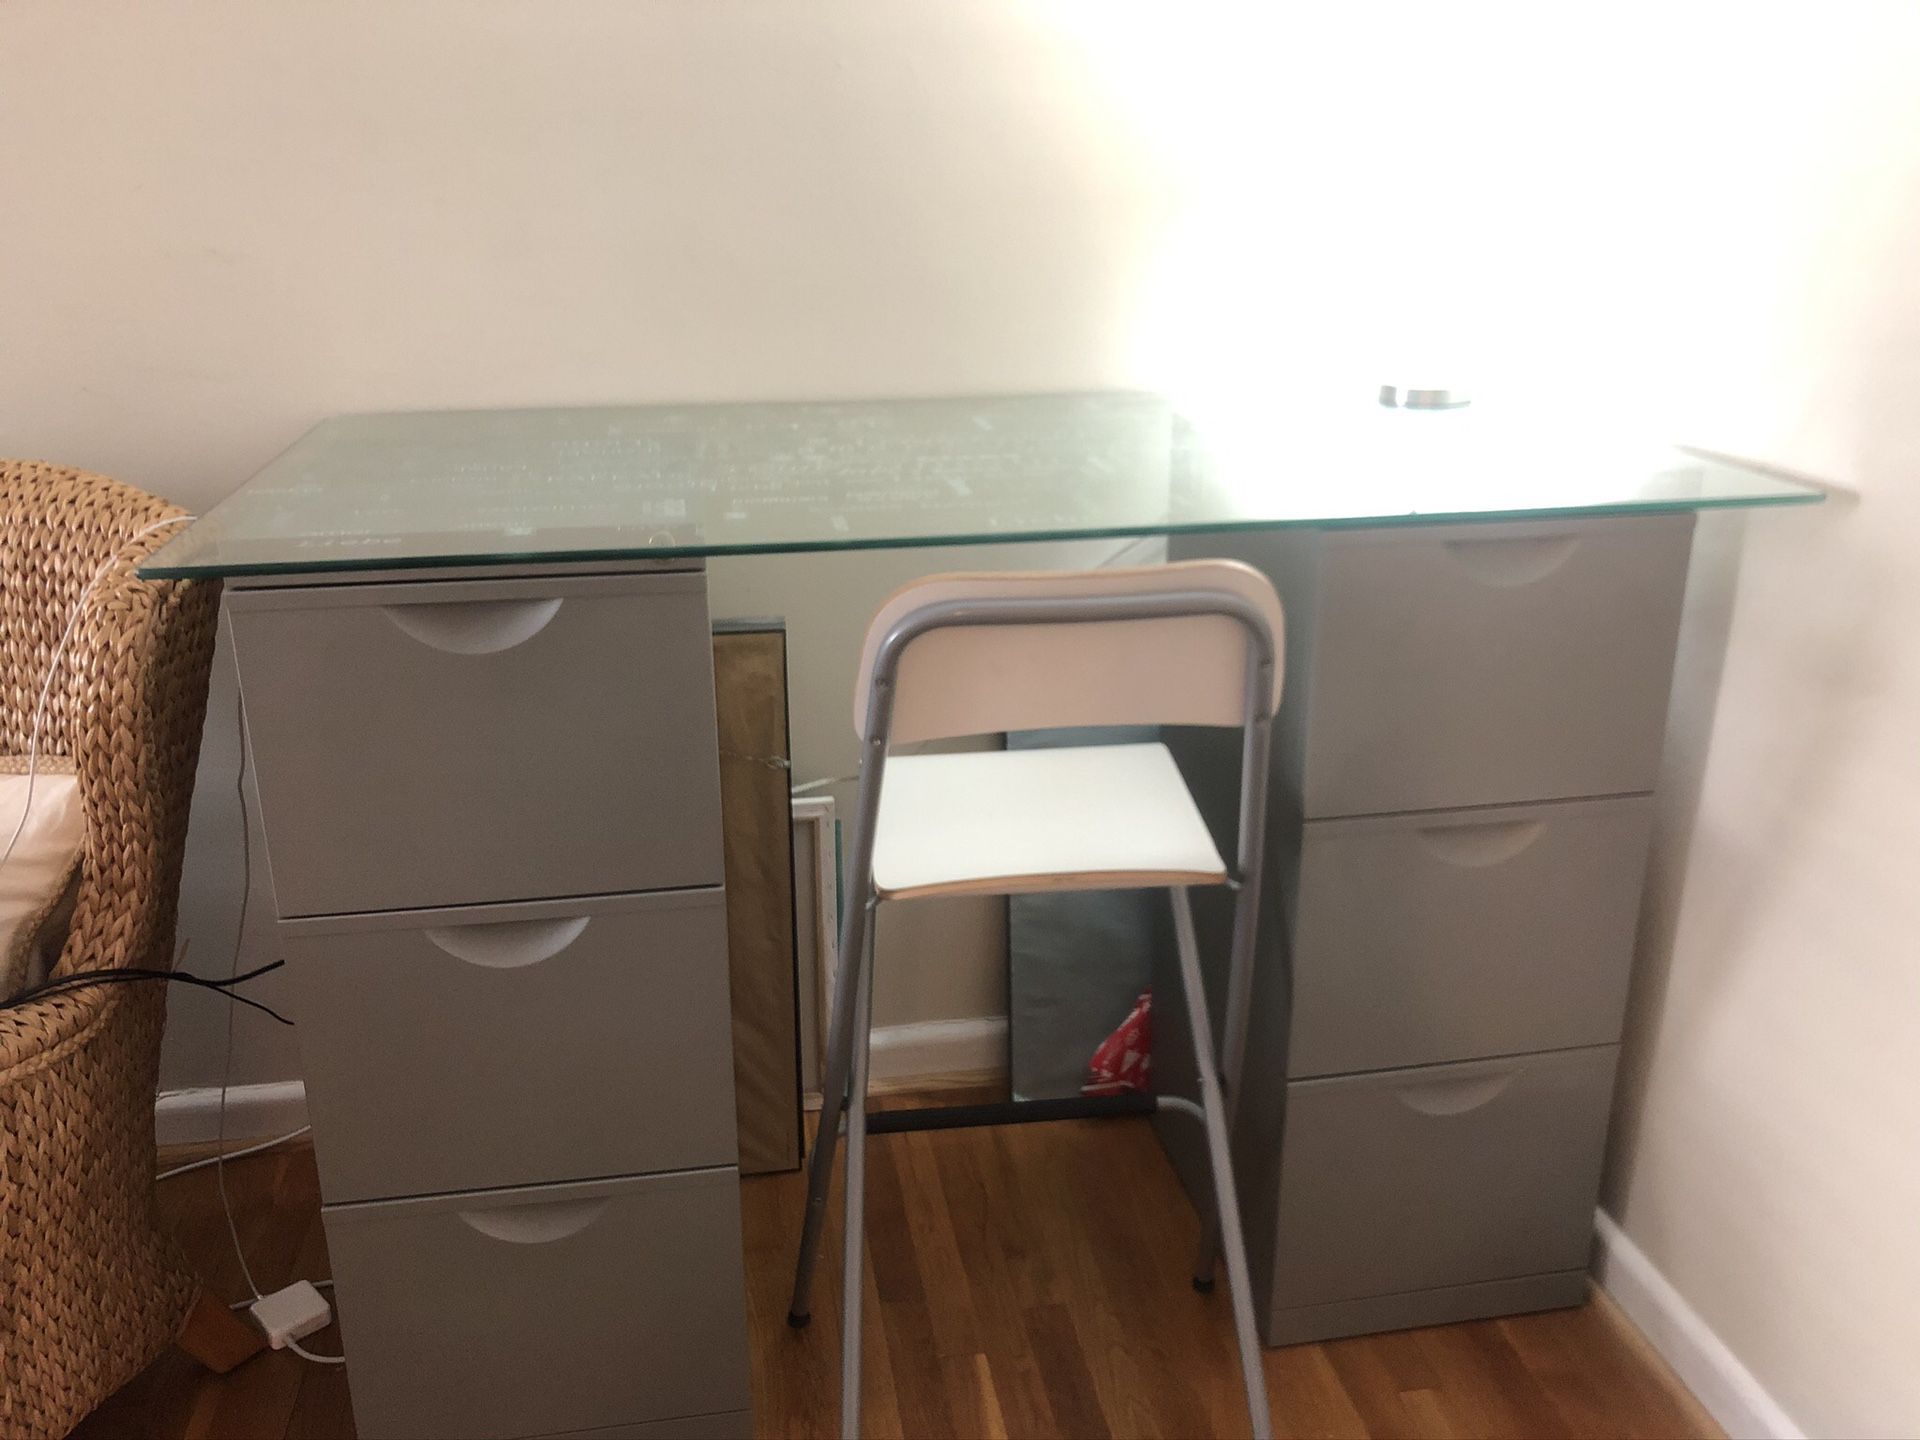 IKEA Standing Desk with File Cabinets and Chair